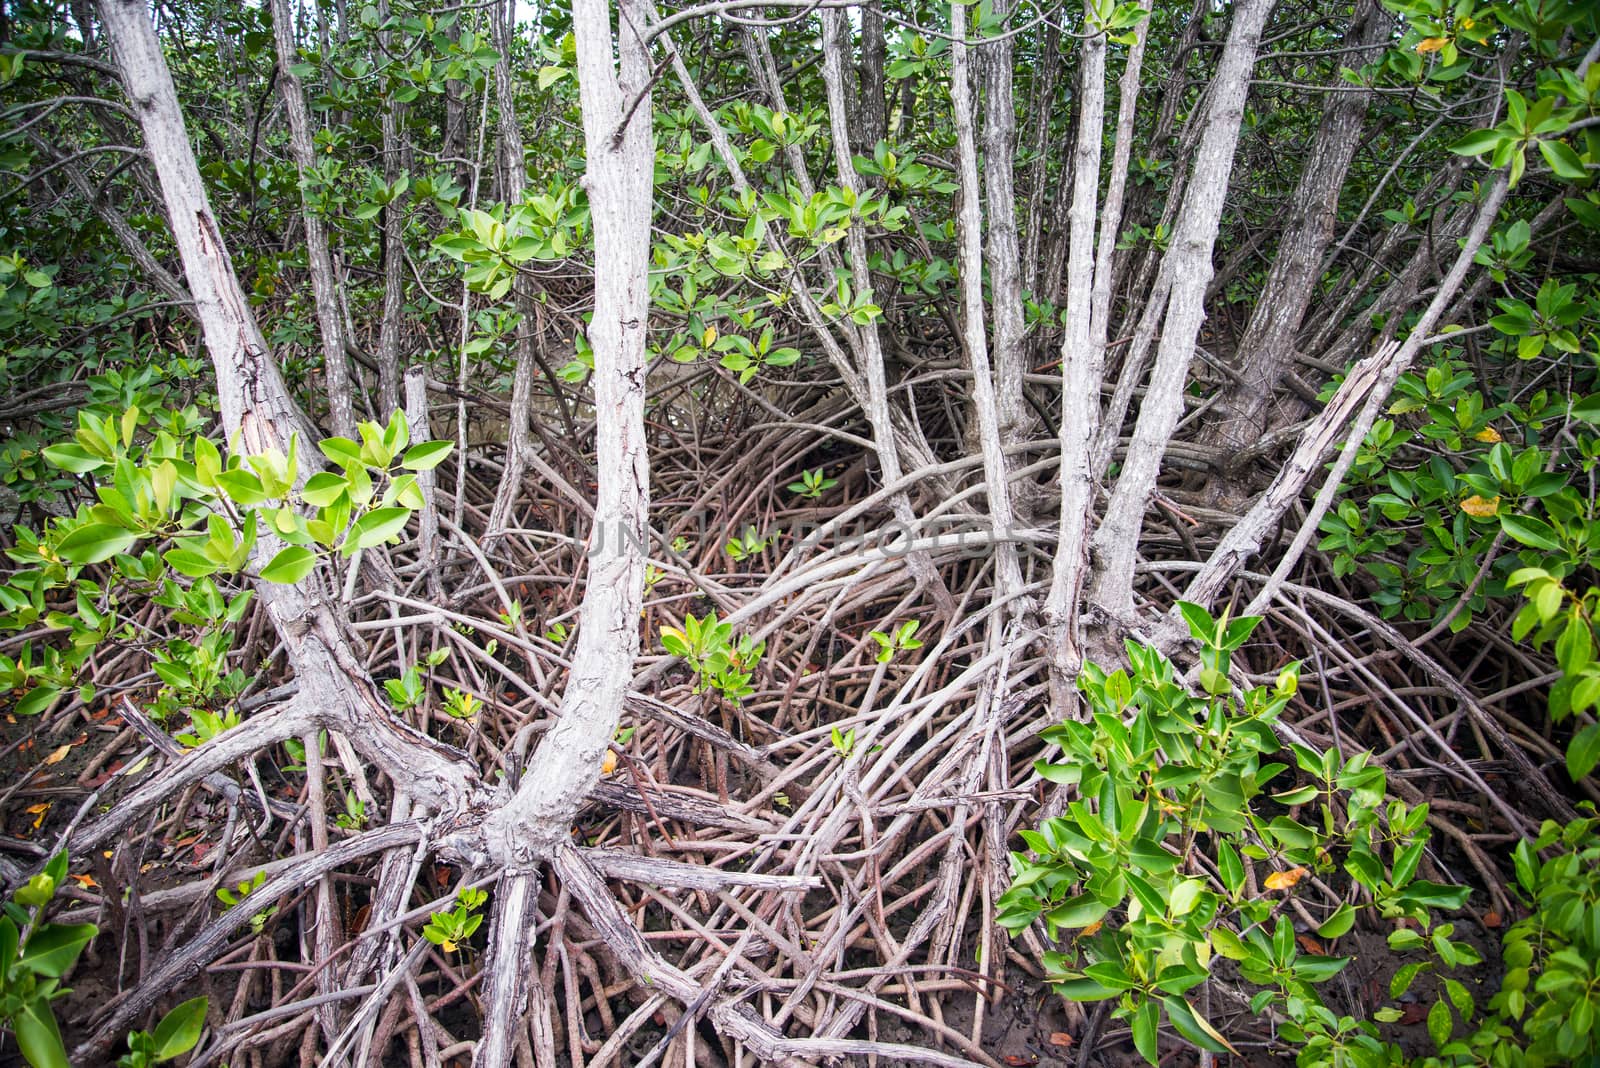 Mangrove forest on the coast of Thailand by jakgree